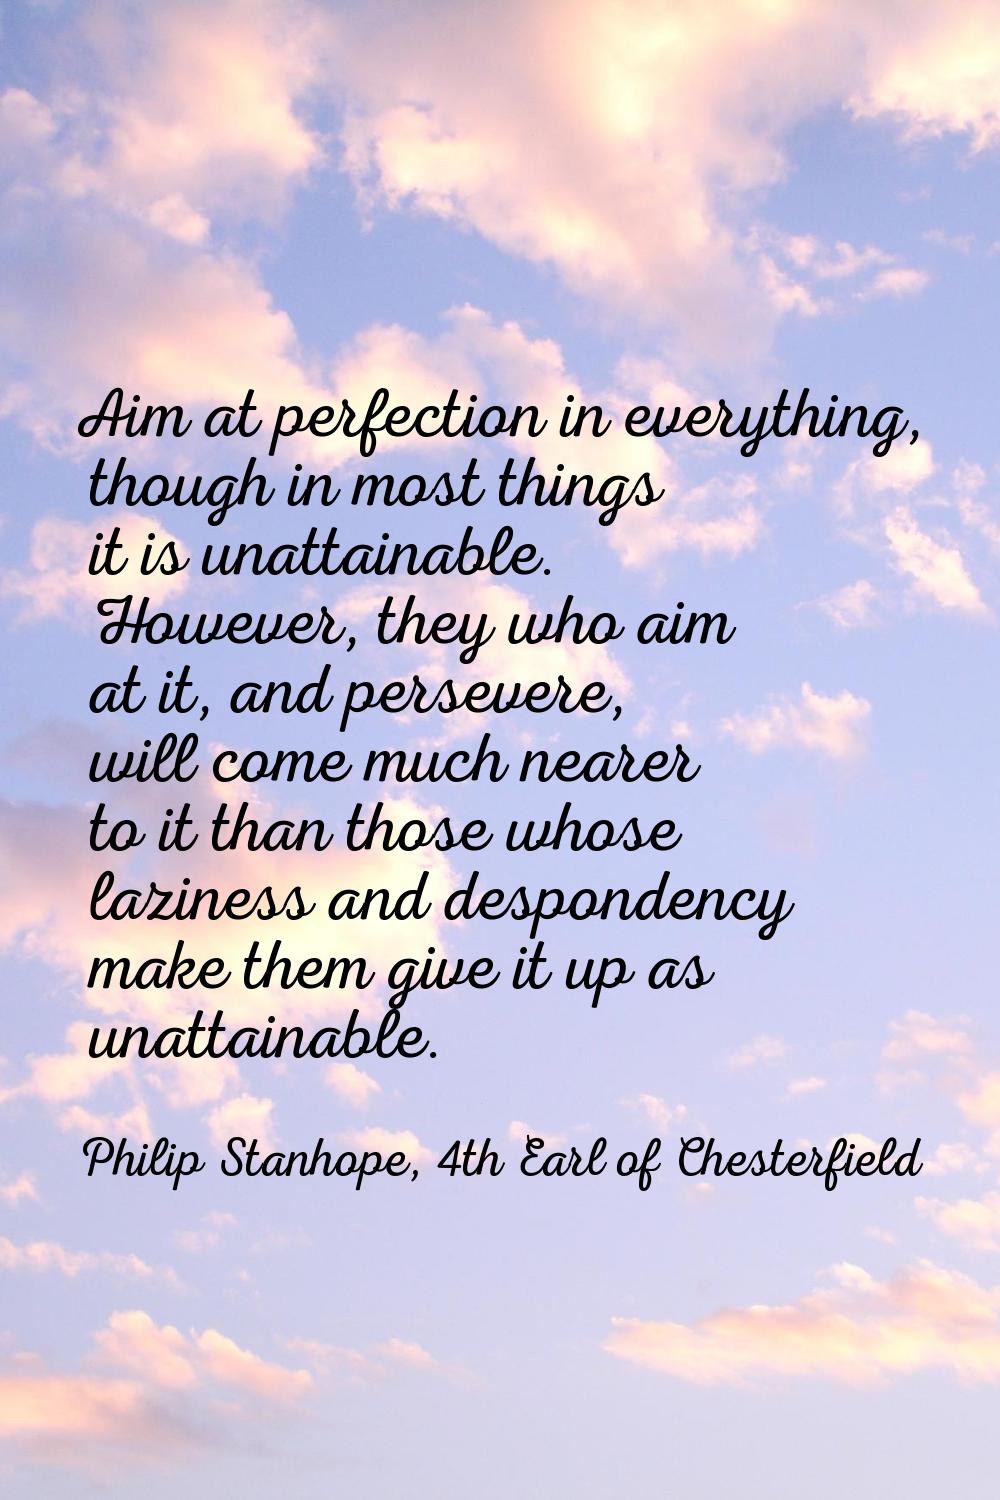 Aim at perfection in everything, though in most things it is unattainable. However, they who aim at